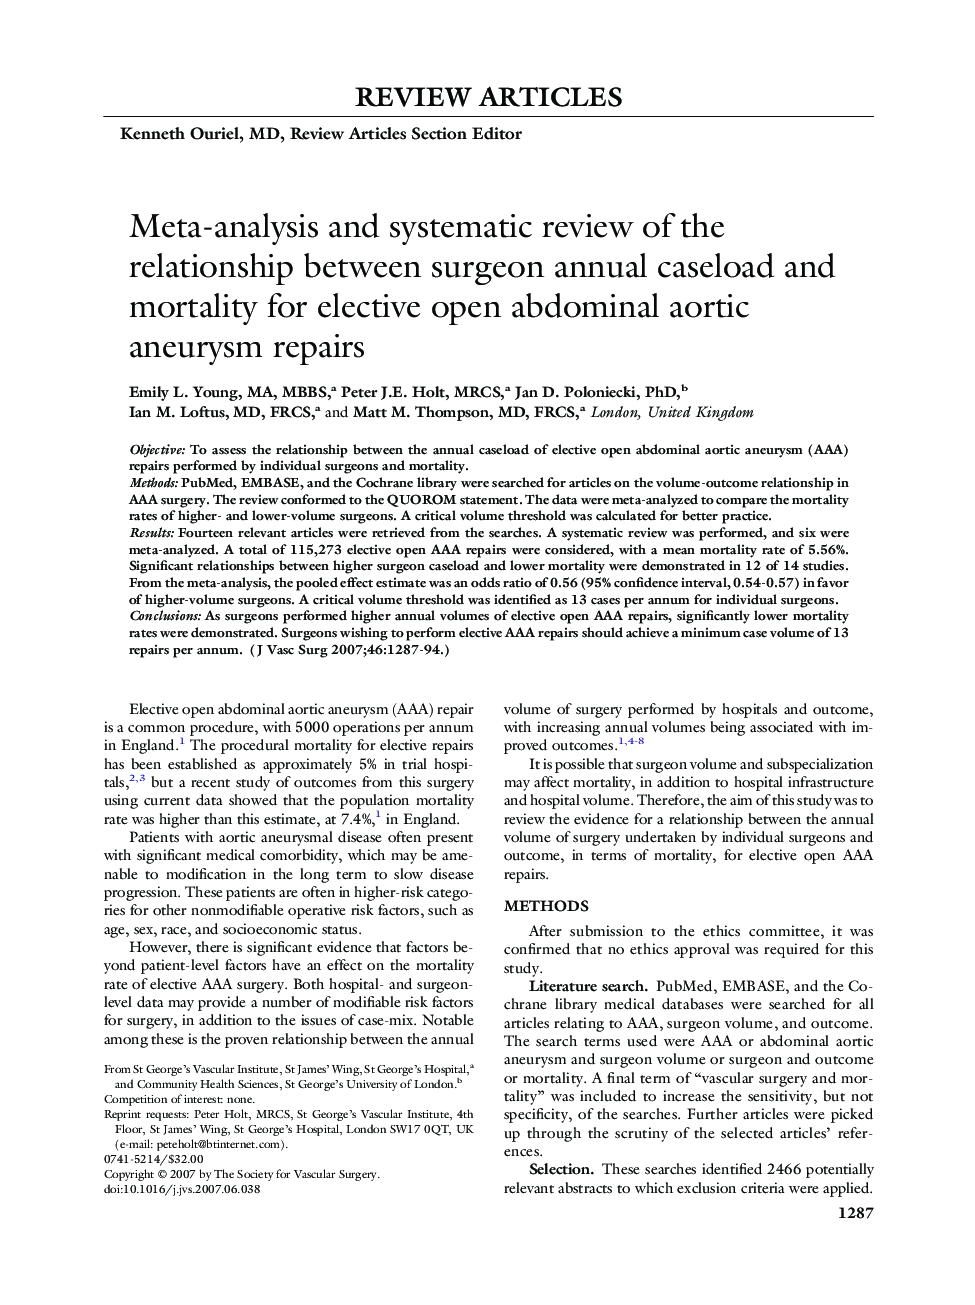 Meta-analysis and systematic review of the relationship between surgeon annual caseload and mortality for elective open abdominal aortic aneurysm repairs 